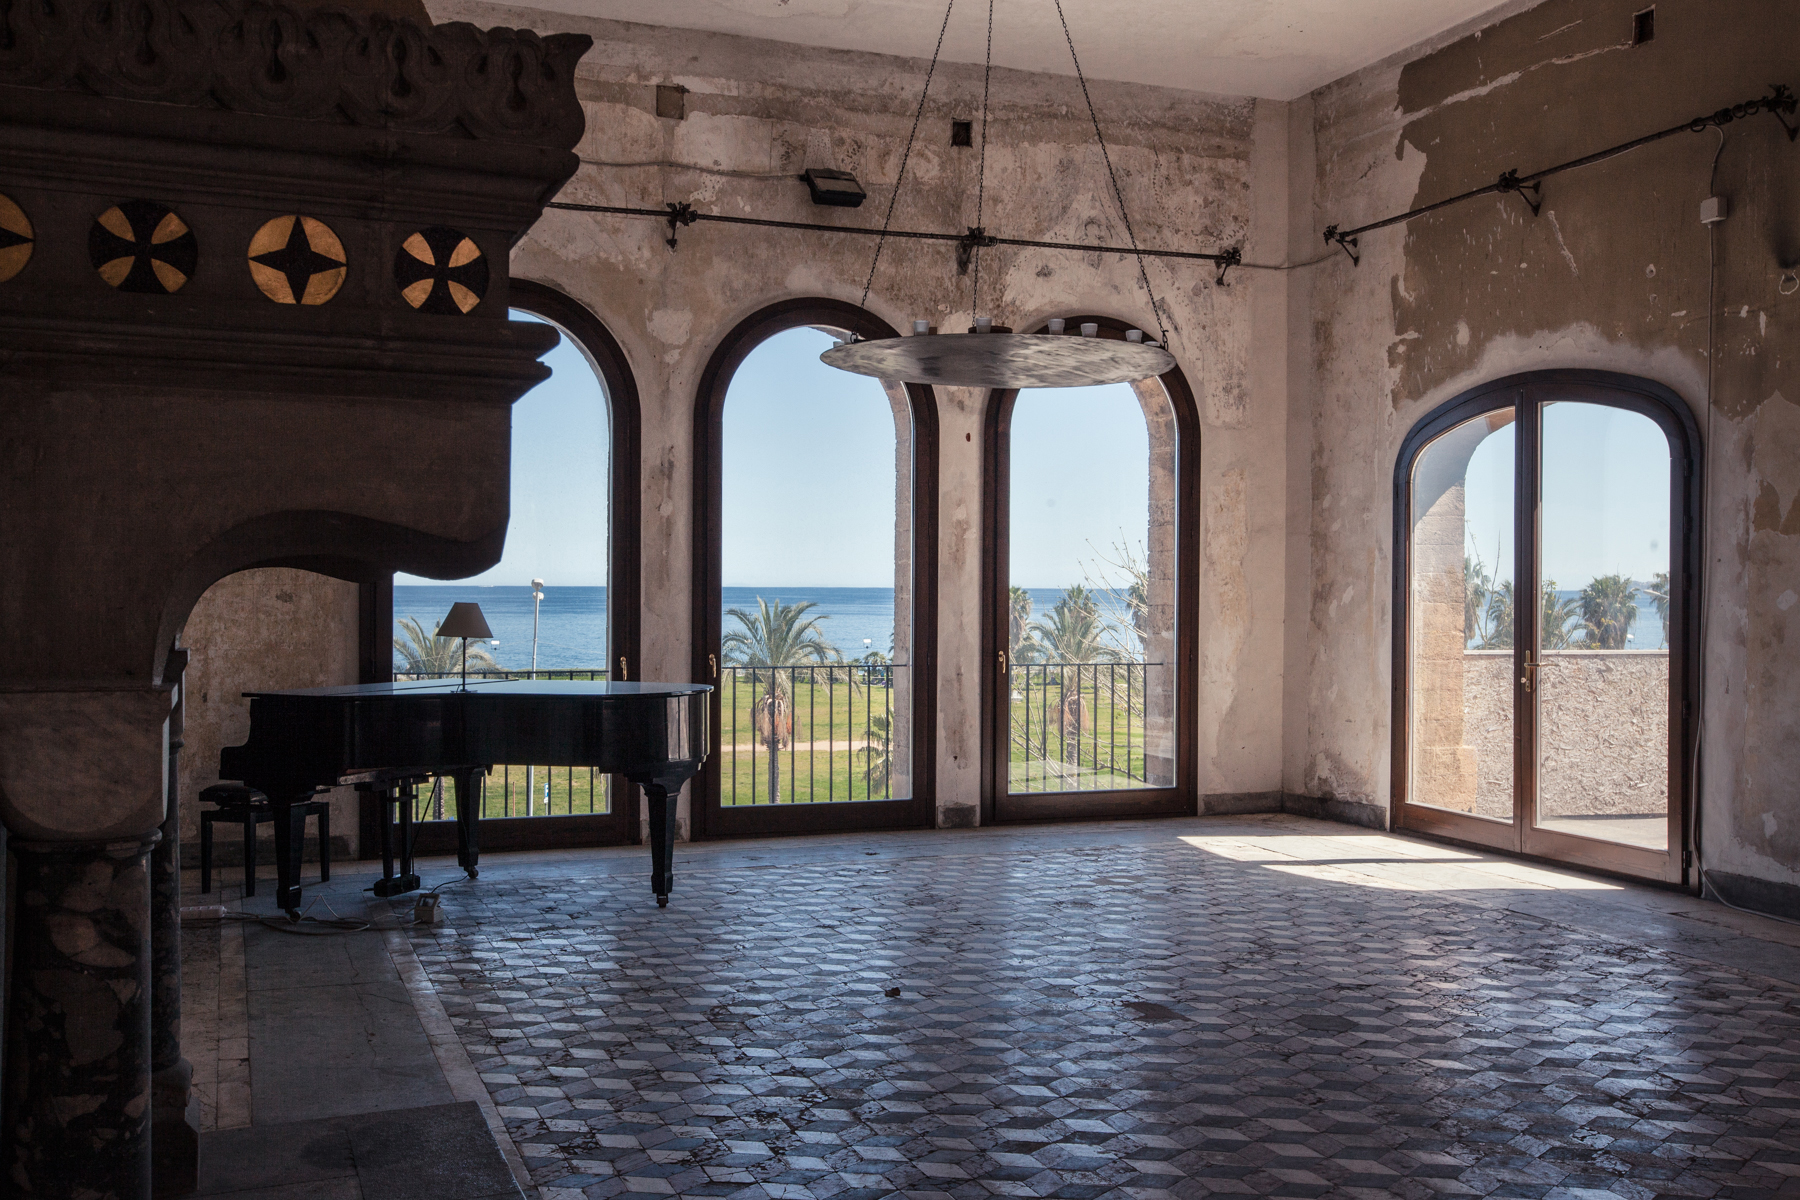 PHOTO: This 19th-century palace is the setting for works in Manifesta that deal directly with the topic of migration. 